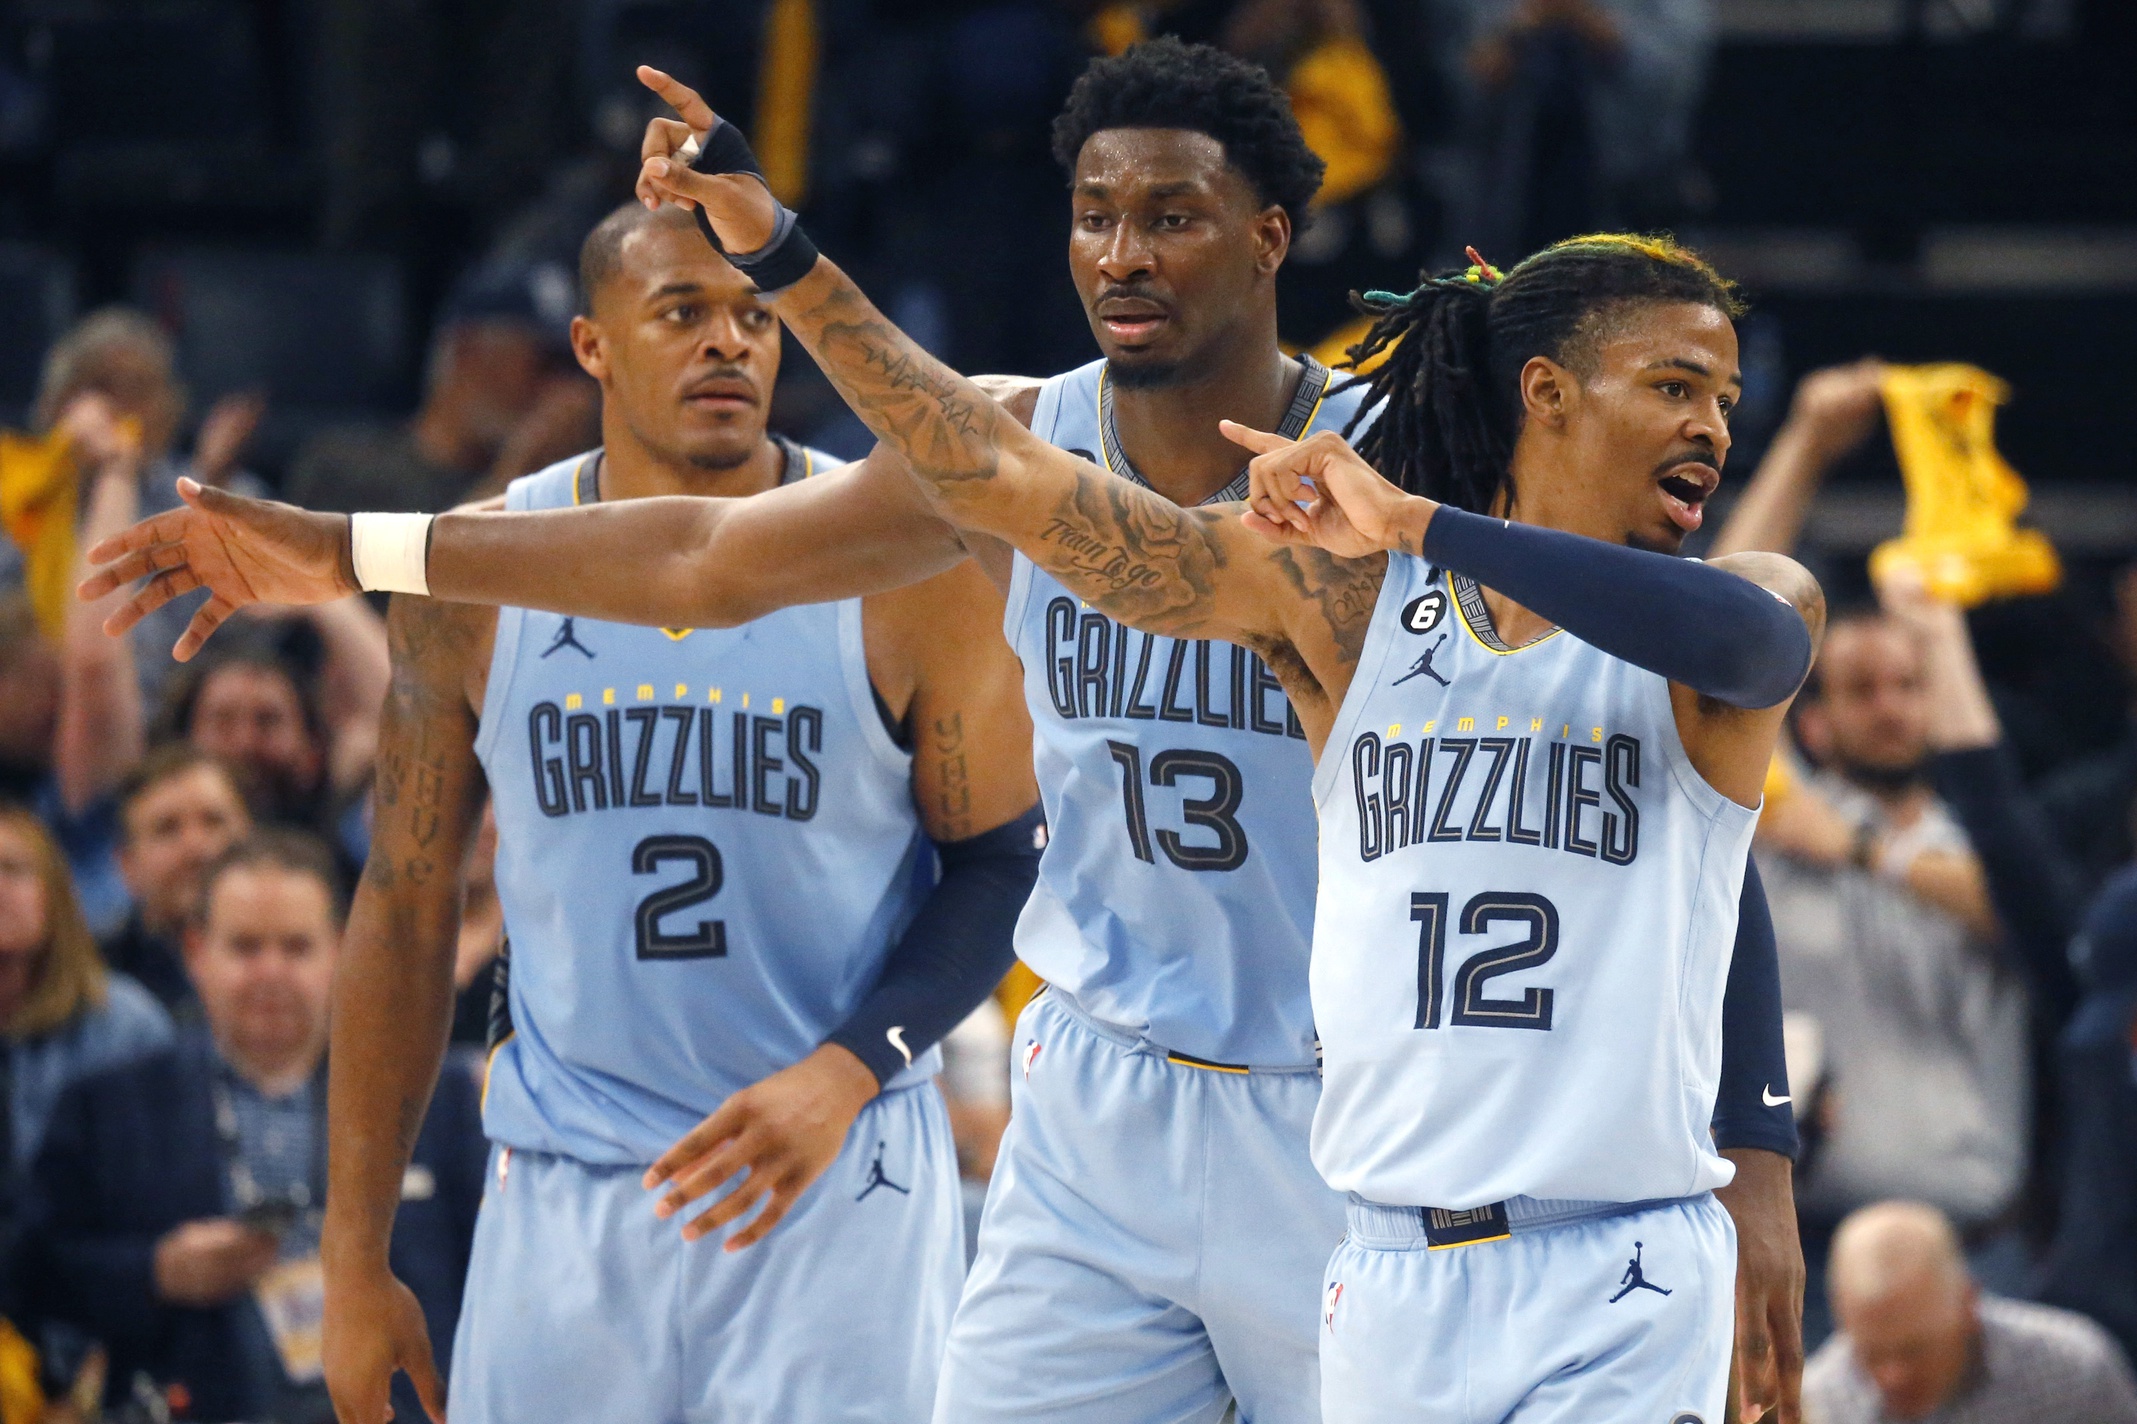 Apr 26, 2023; Memphis, Tennessee, USA; Memphis Grizzlies forward Jaren Jackson Jr. (13) and Memphis Grizzlies guard Ja Morant (12) react during the second half against the Los Angeles Lakers during game five of the 2023 NBA playoffs at FedExForum. Mandatory Credit: Petre Thomas-USA TODAY Sports